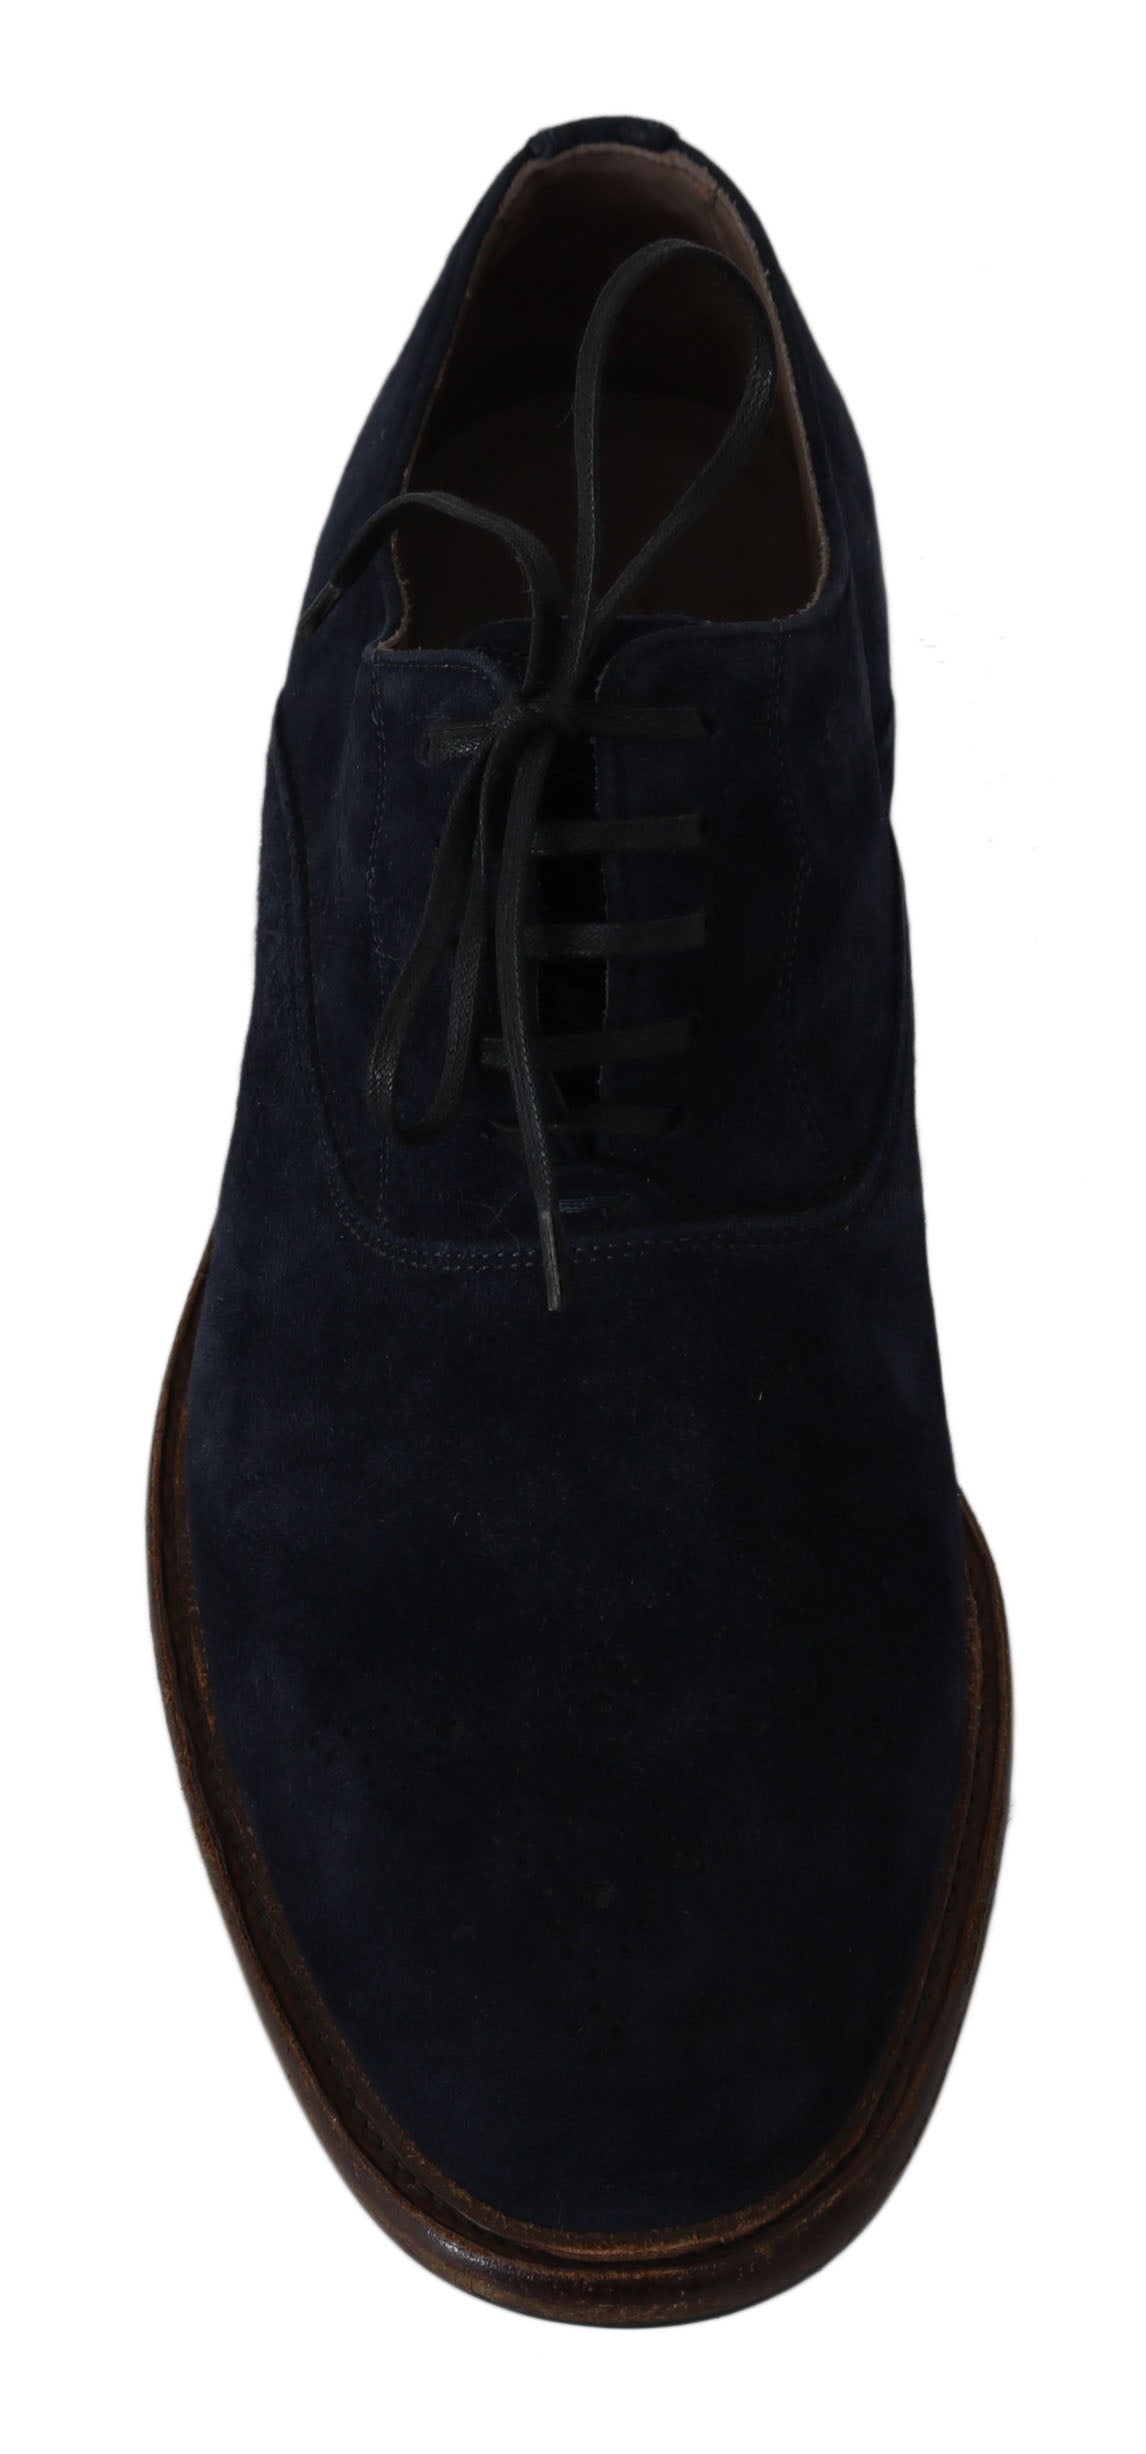 Blue Leather Marsala Derby Goatskin Shoes - Designed by Dolce & Gabbana Available to Buy at a Discounted Price on Moon Behind The Hill Online Designer Discount Store